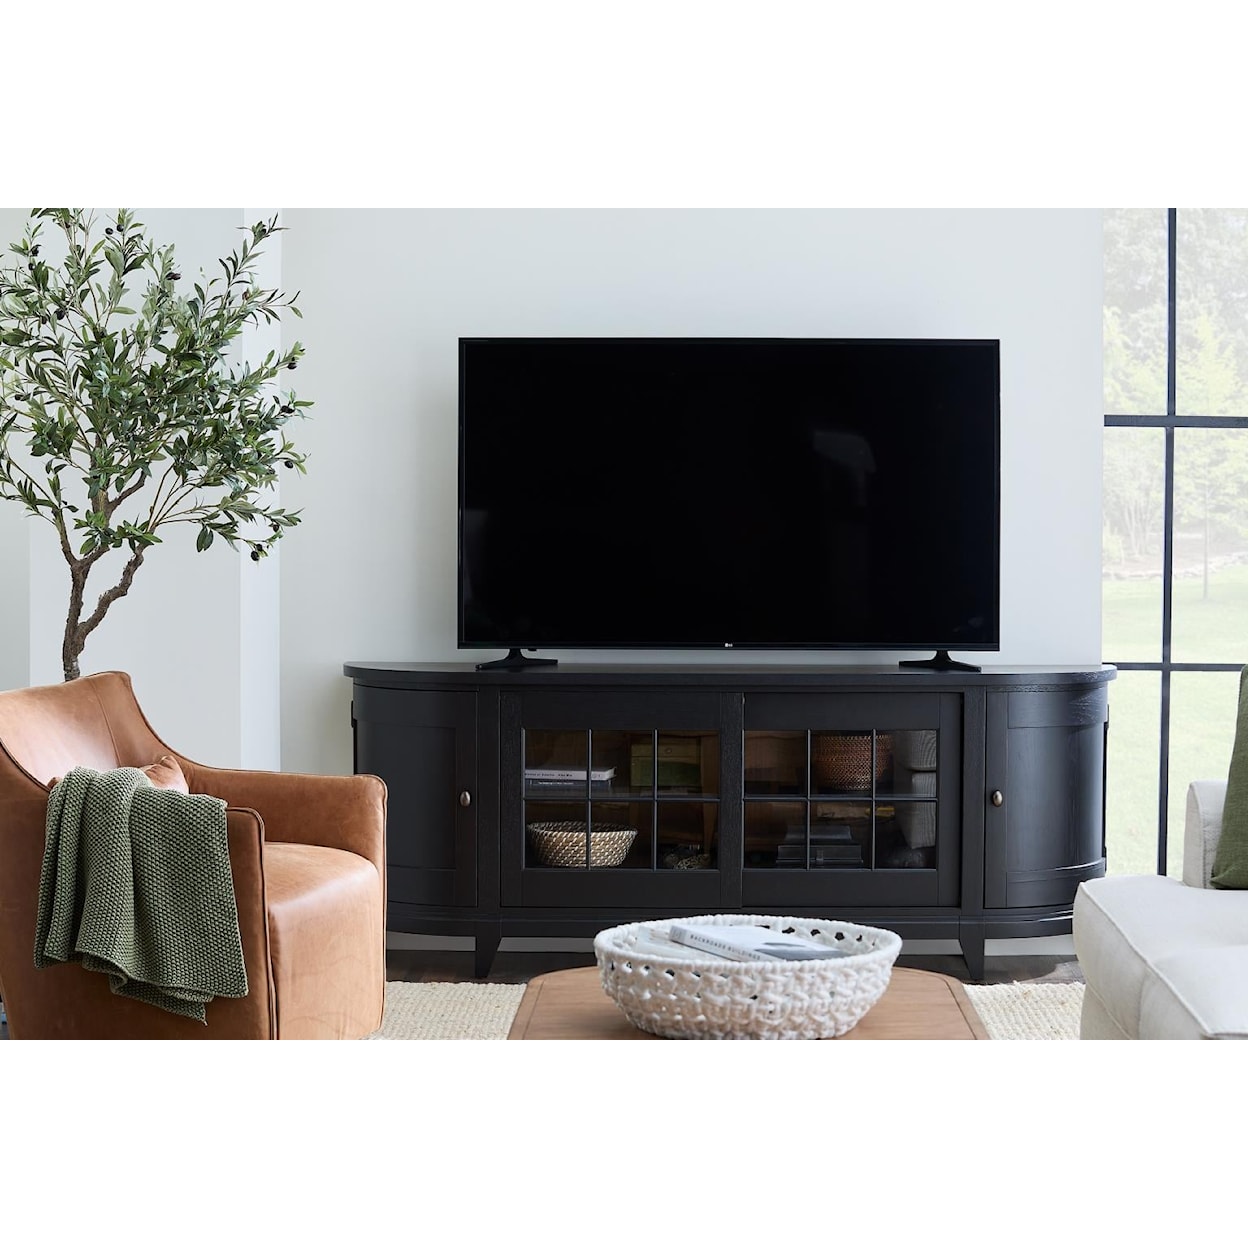 Trisha Yearwood Home Collection by Legacy Classic Today's Traditions Entertainment Console